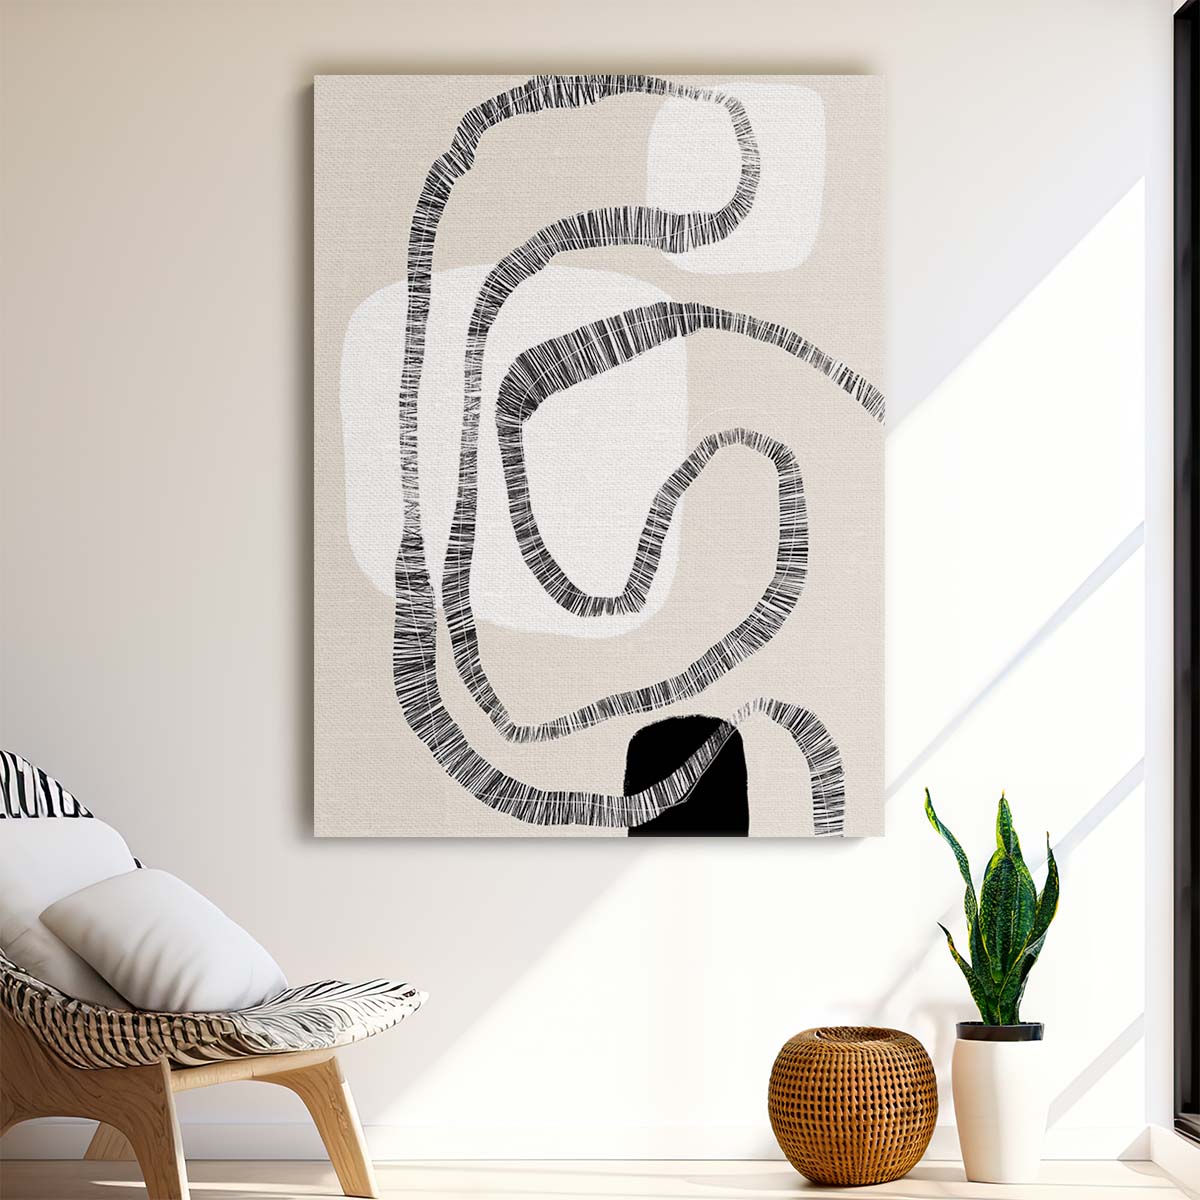 Boho Beige Abstract Illustration Bohemian Liaison Shapes Wall Art by Luxuriance Designs, made in USA